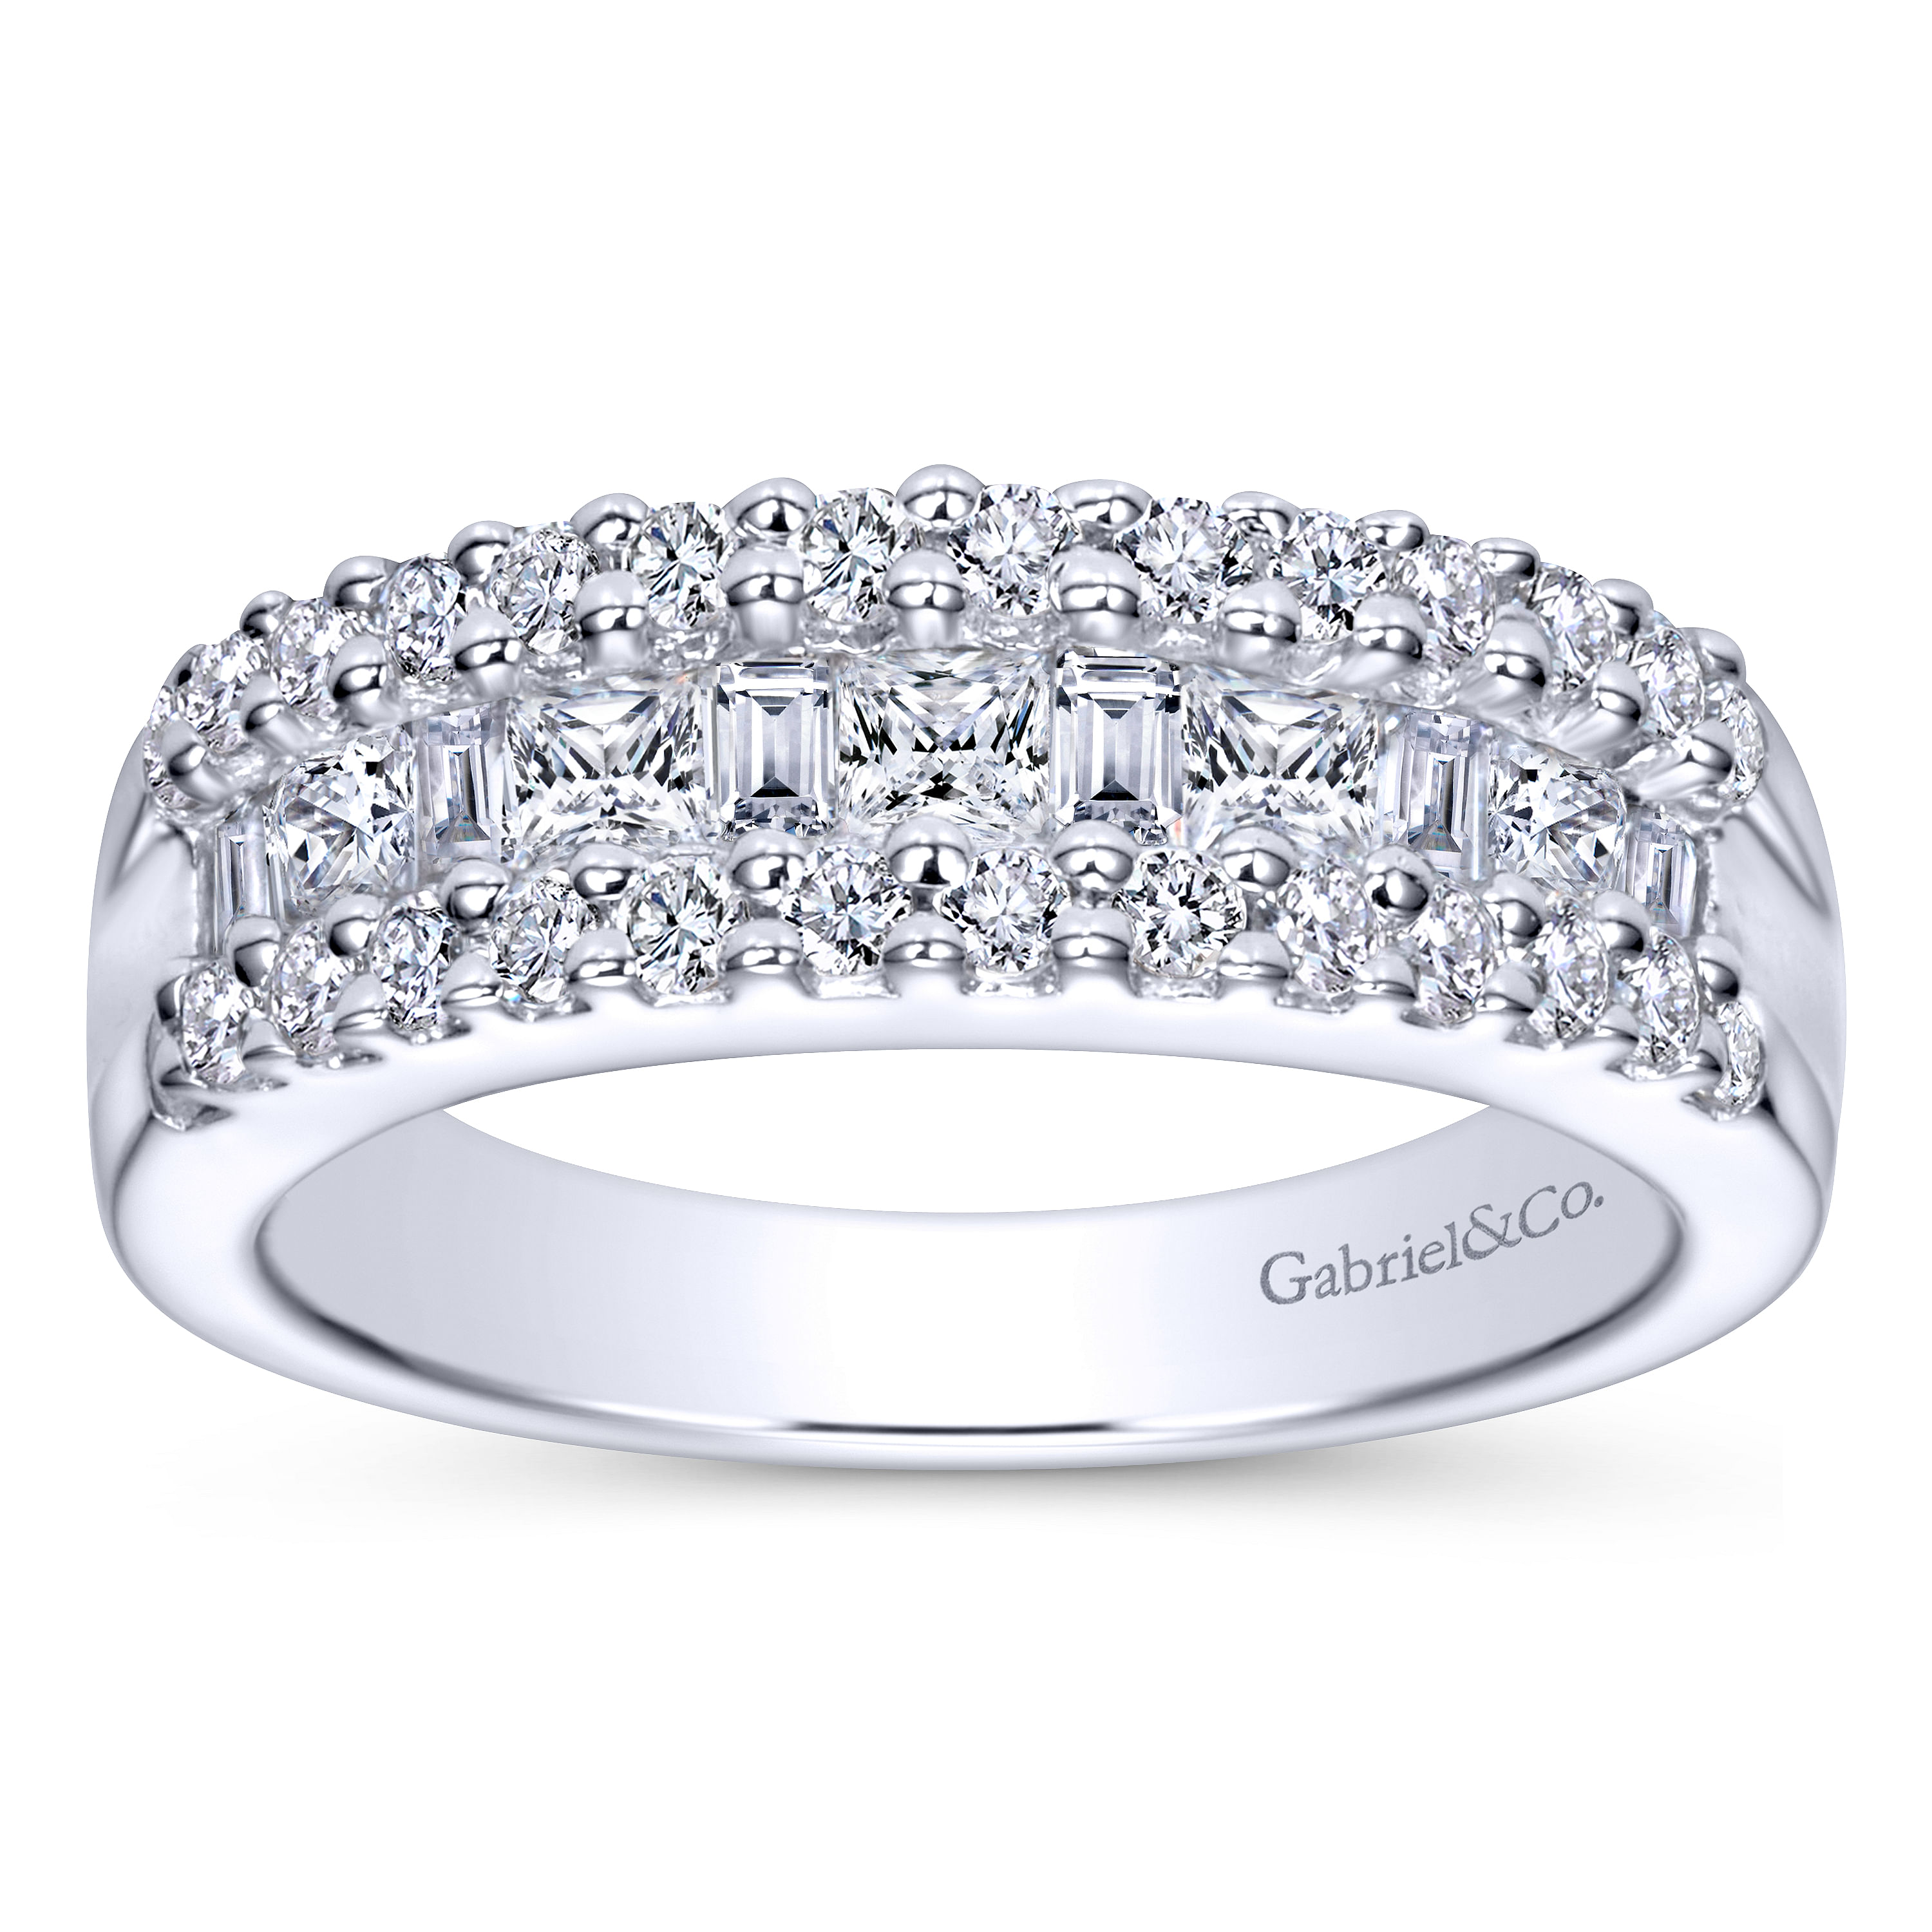 Wide 14K White Gold Round and Baguette Diamond Anniversary Band